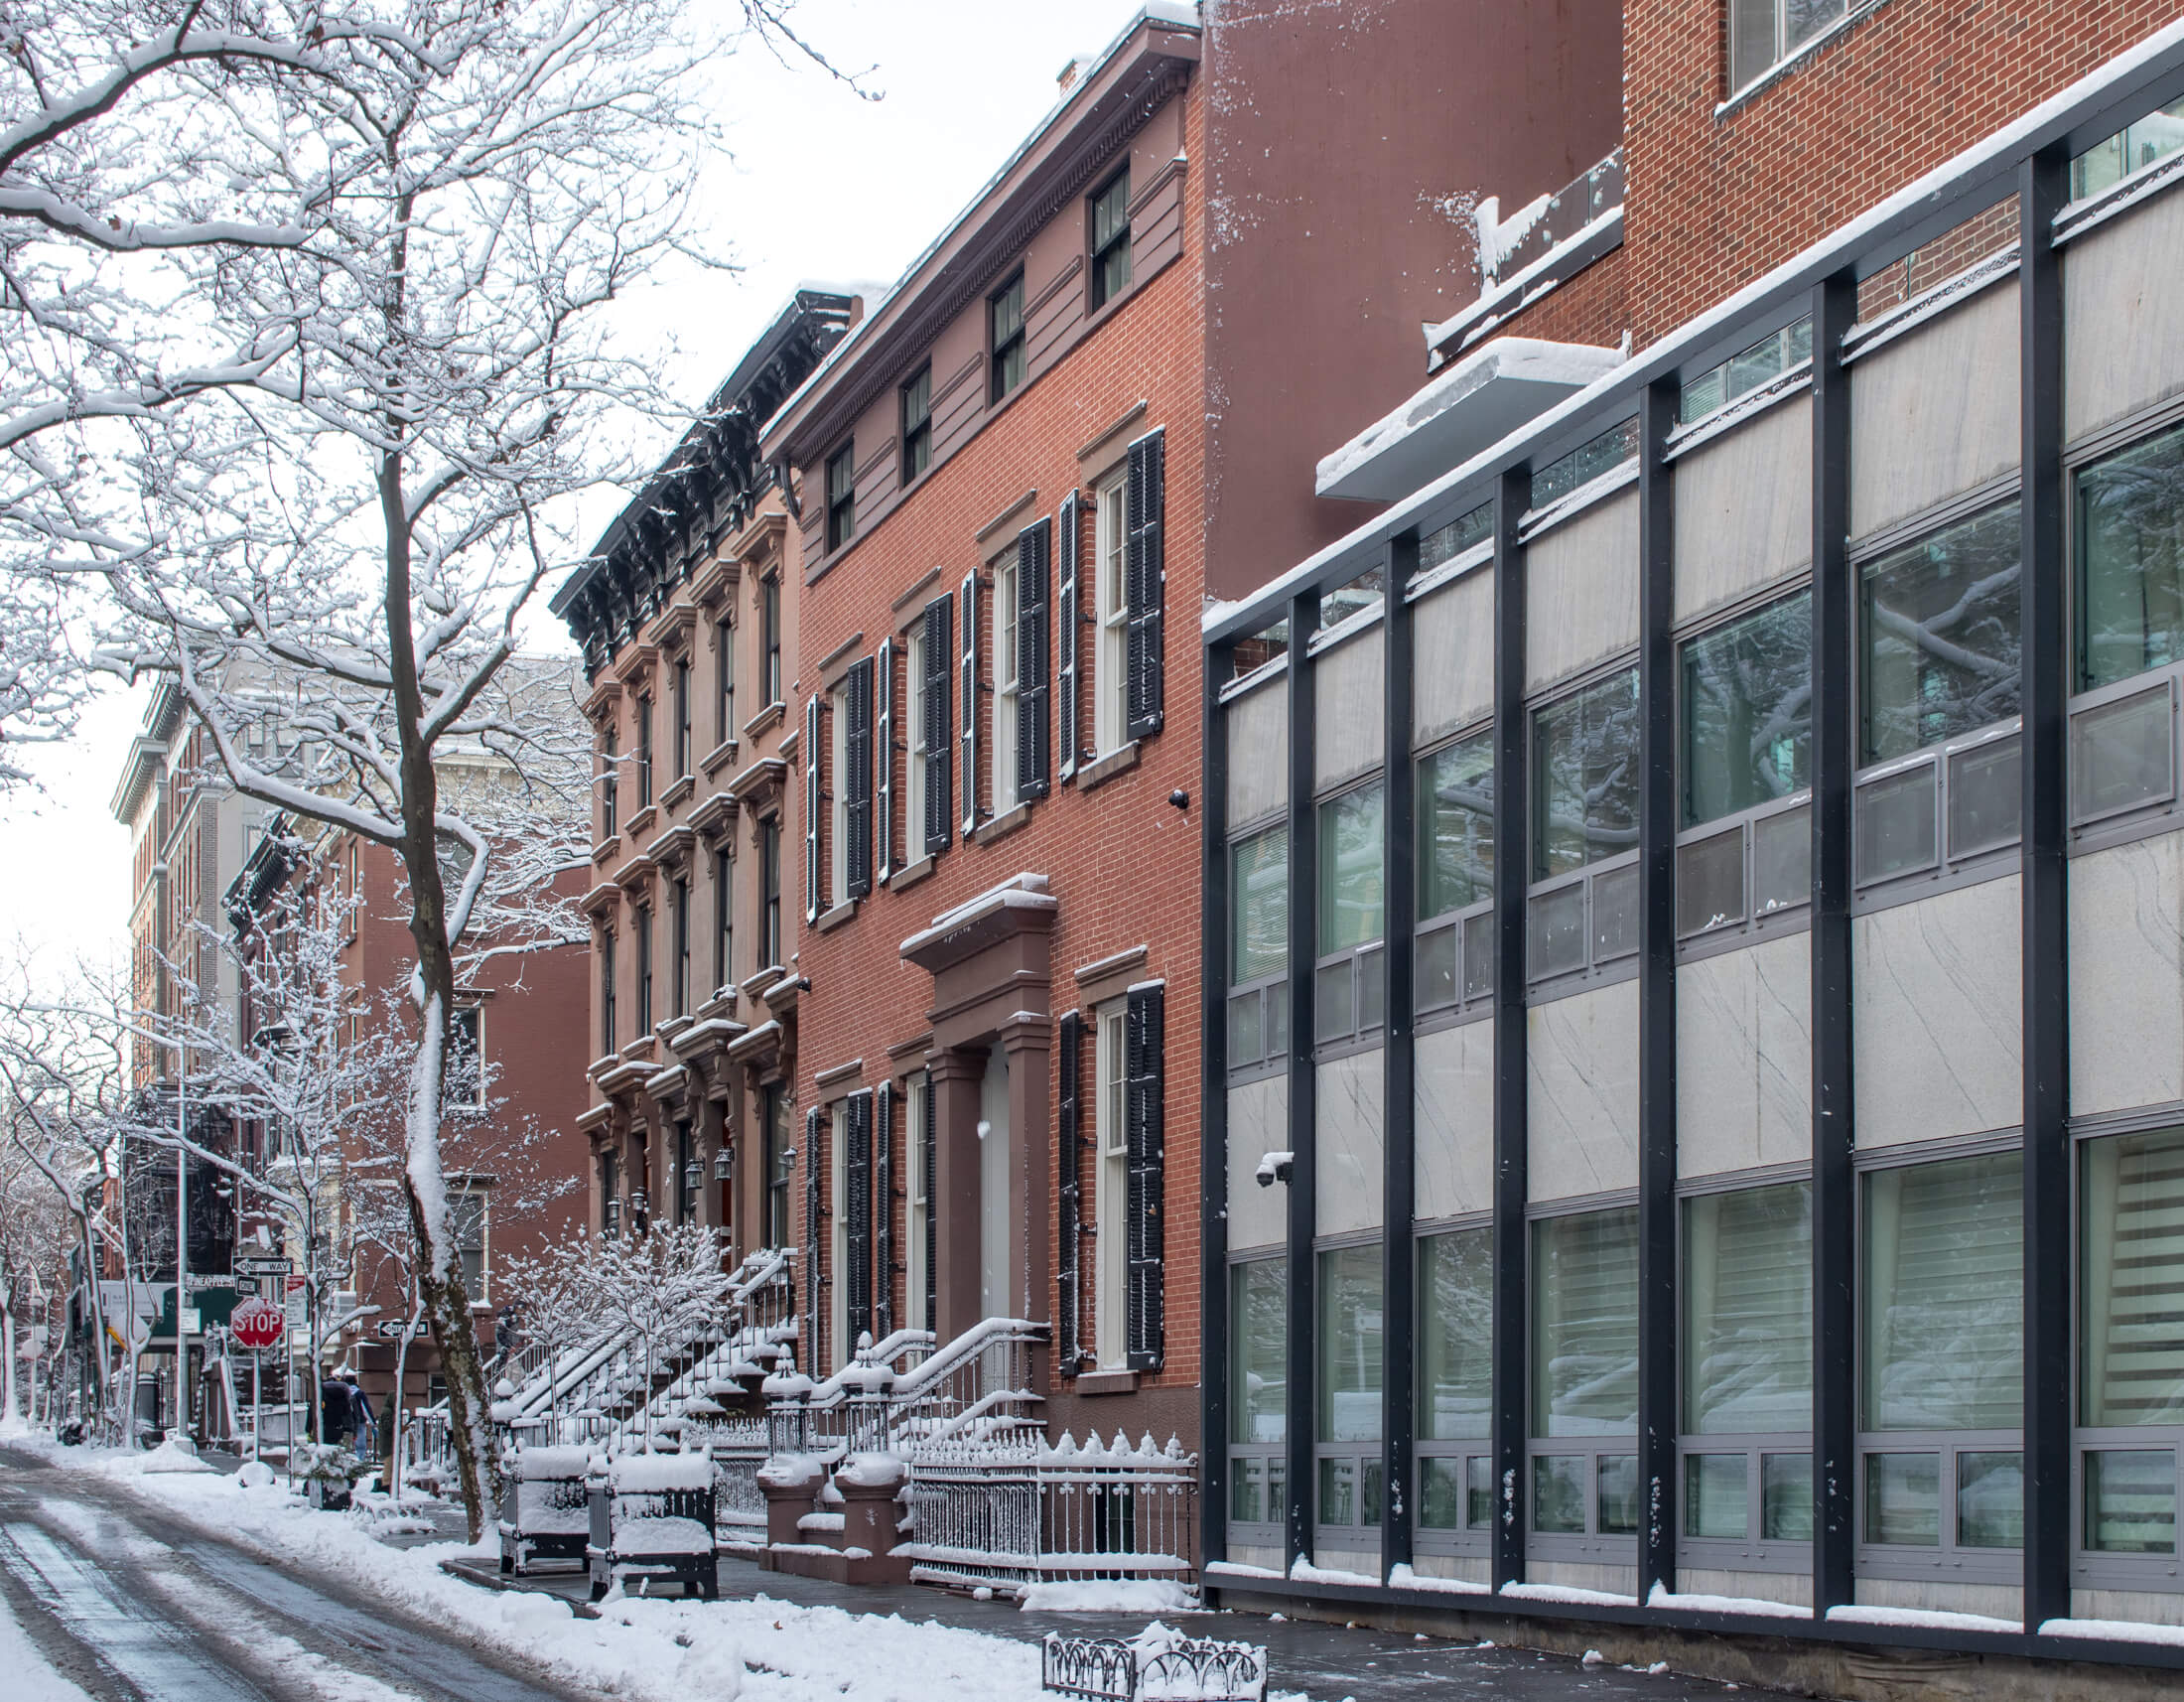 snowy view of willow street in brooklyn heights